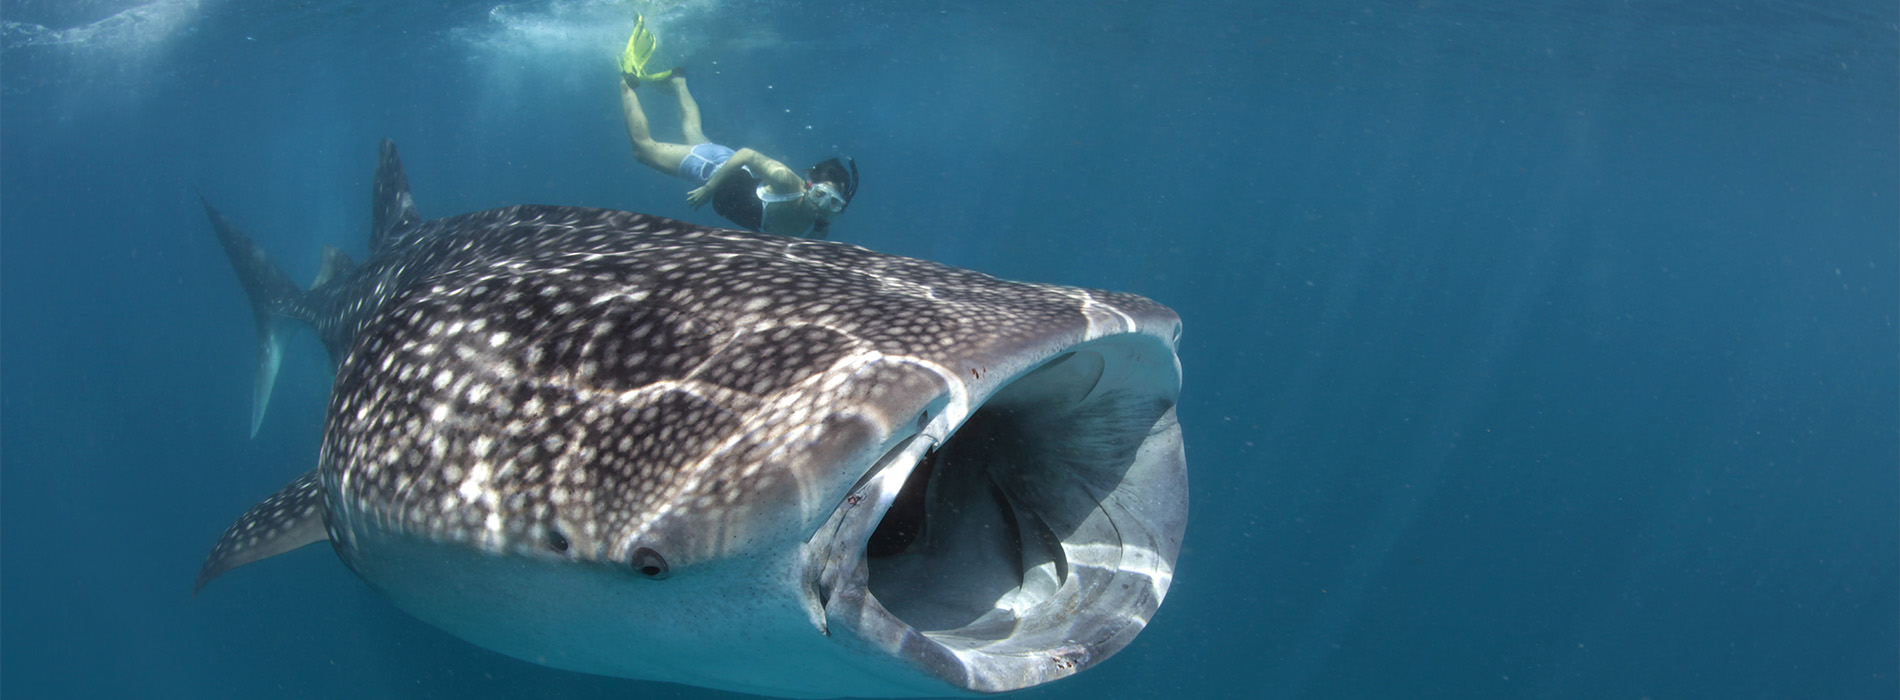 Maldives: Wildlife adventures with whale sharks and manta rays